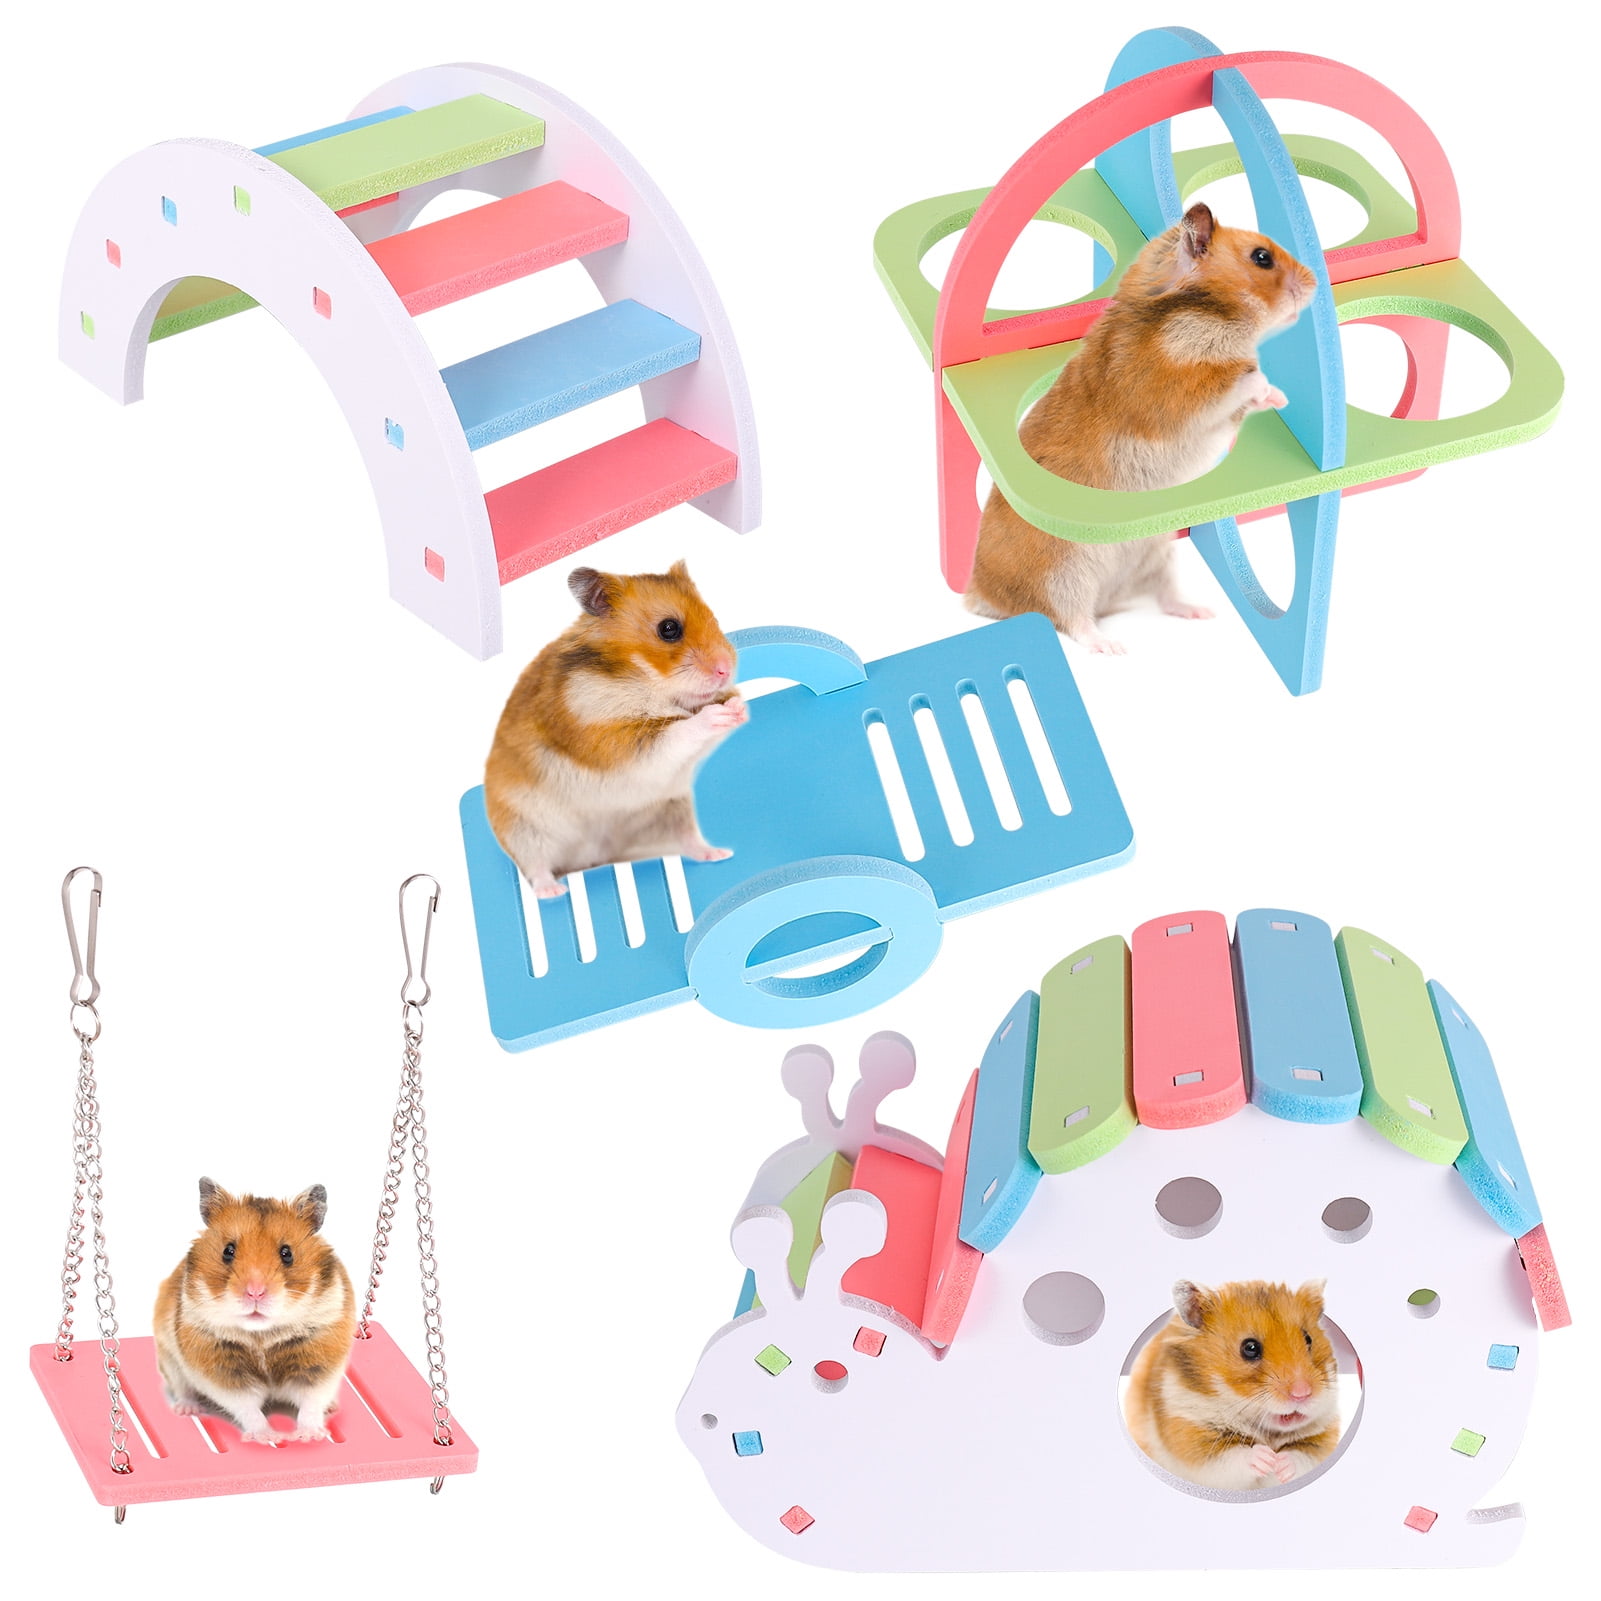 Hamster Swing Toy,Small Pet Pink Wooden Ladder with Rope Swing Bridge Stand Bracket Climbing Steps Stairs for Squirrel Sugar Glider Hamster Parrot